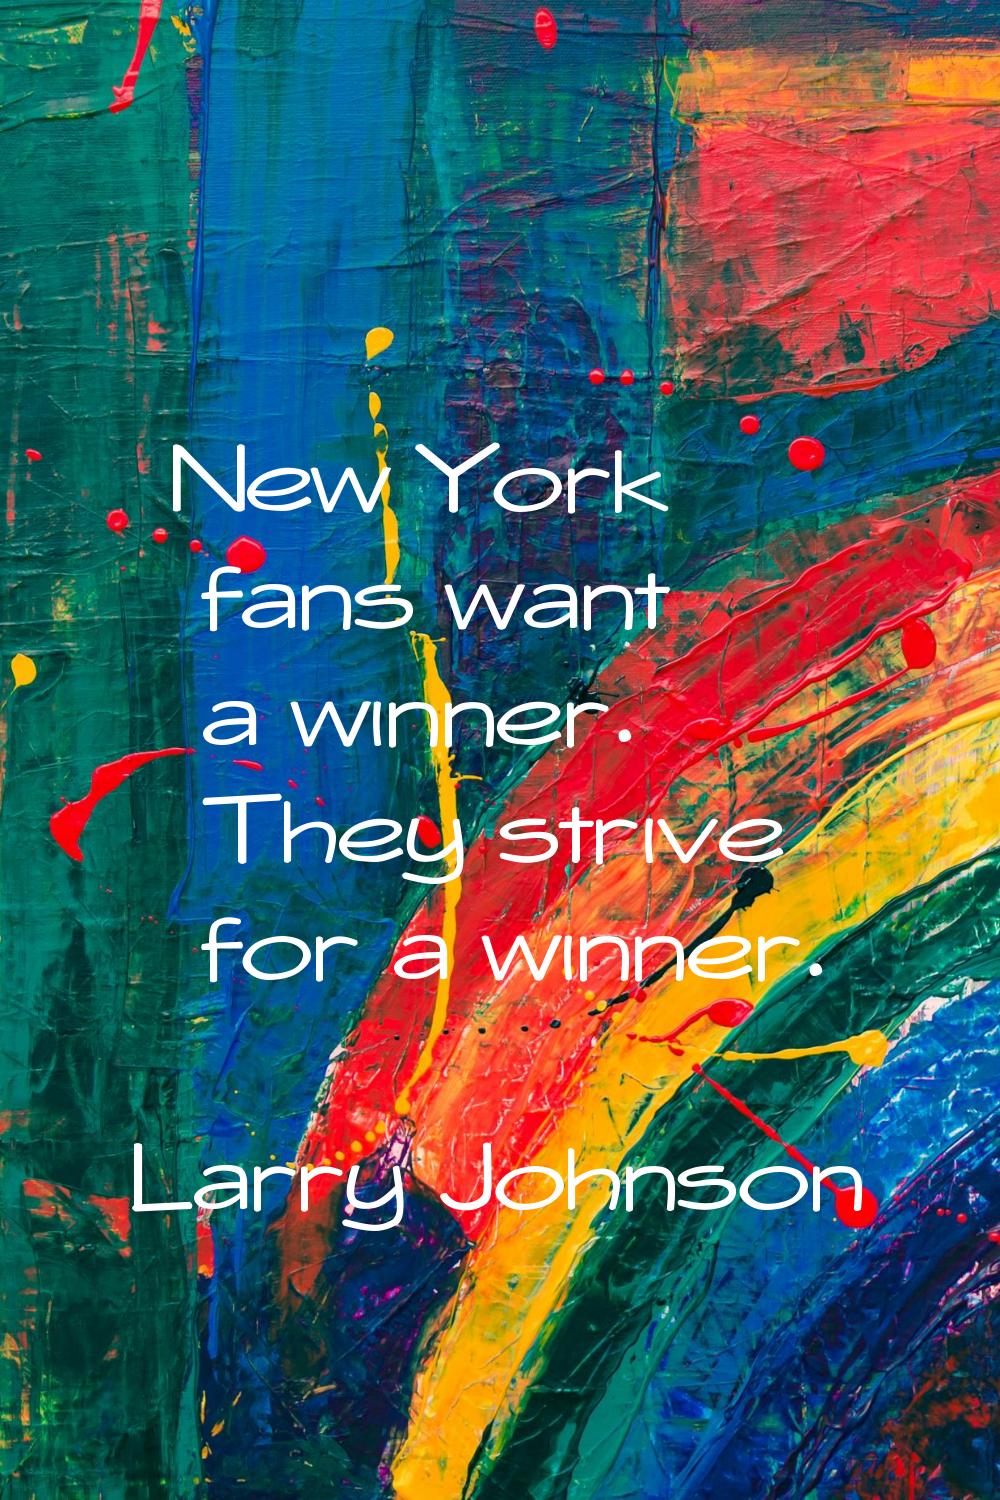 New York fans want a winner. They strive for a winner.